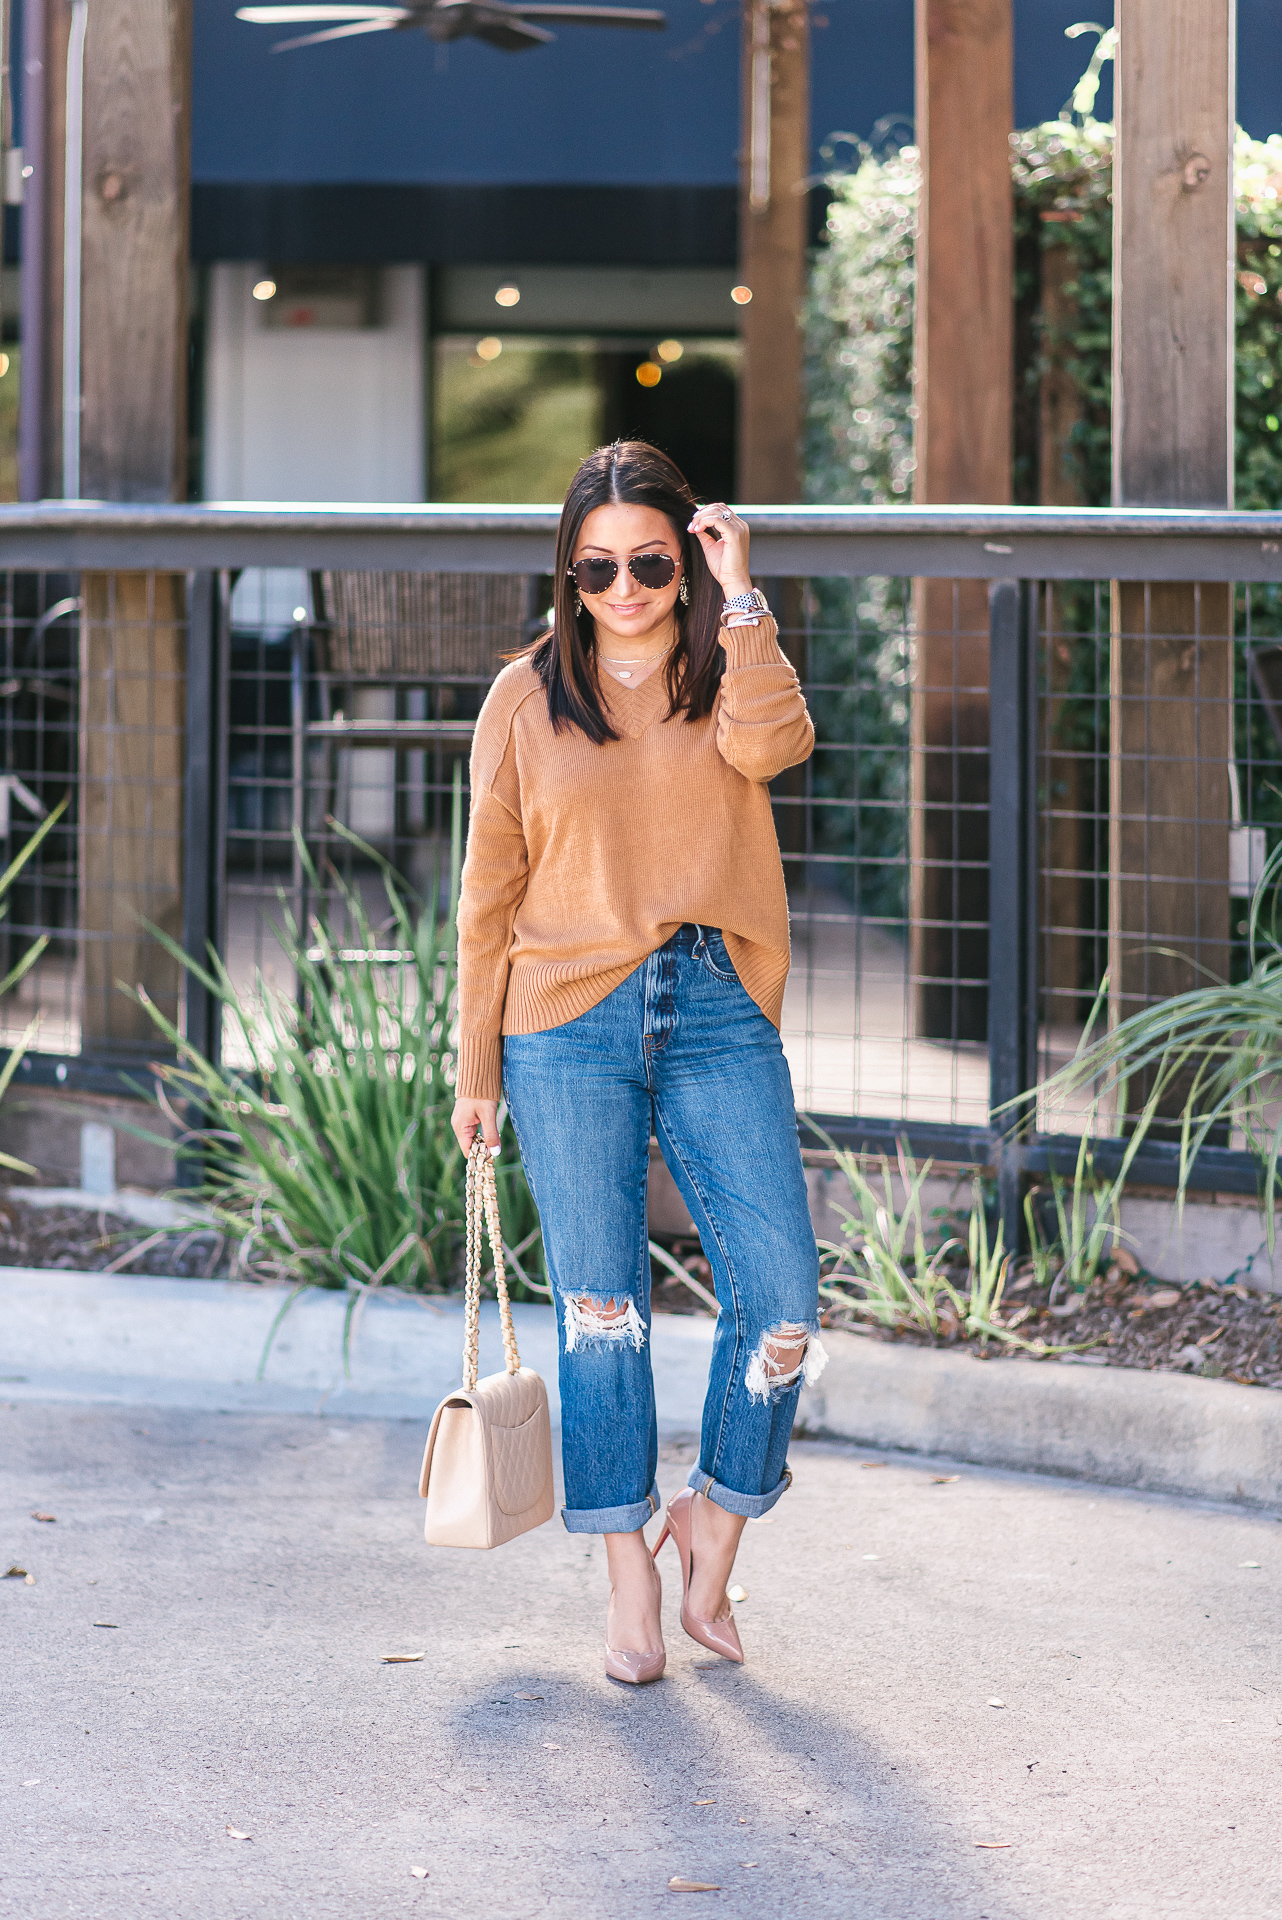 The Softest Sweater and Vintage Jeans | LuxMommy | Houston Fashion ...